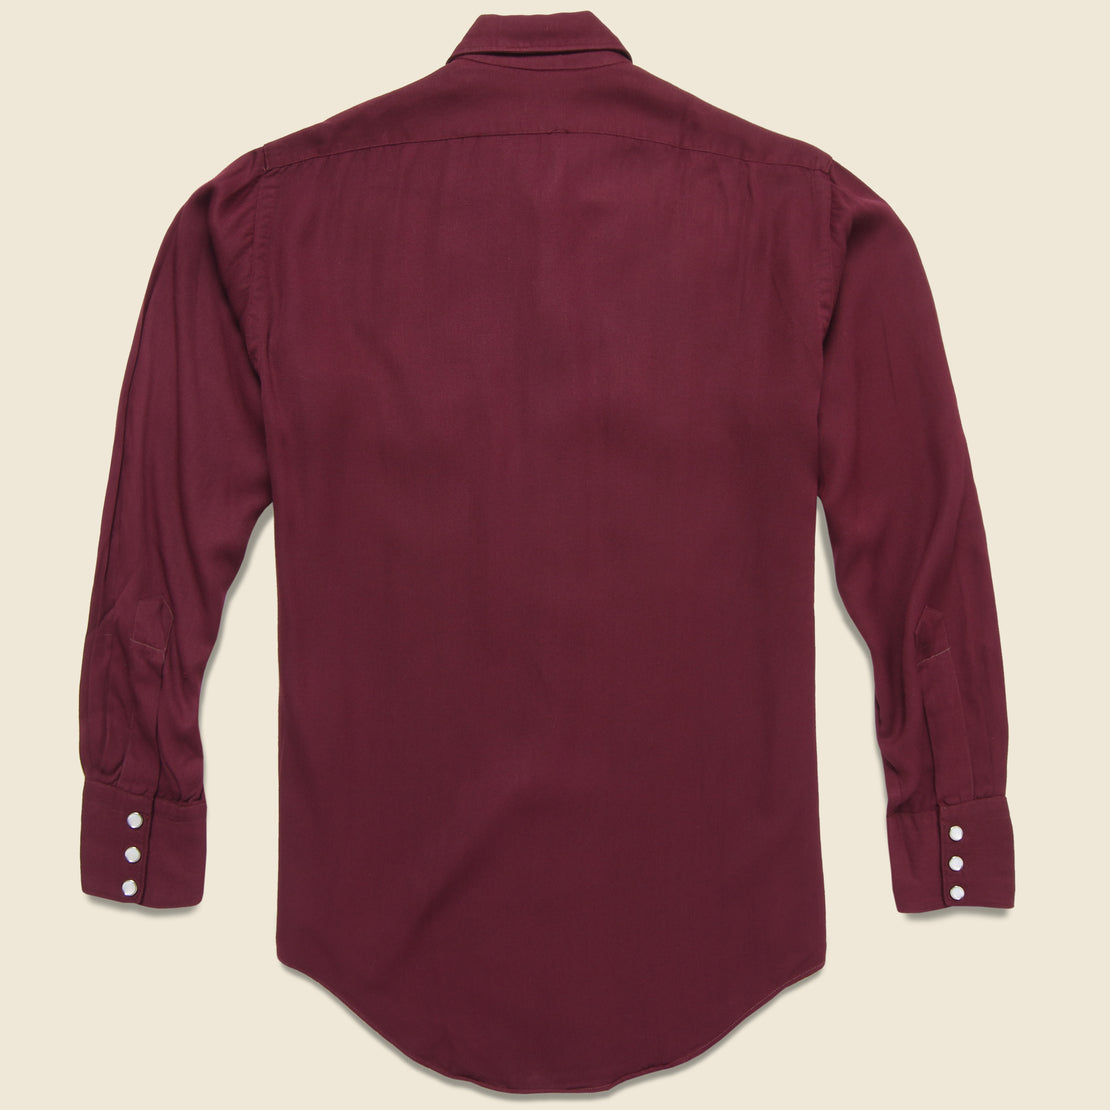 Cotton Sateen Western Shirt - Burgundy - Vintage - STAG Provisions - One & Done - Apparel